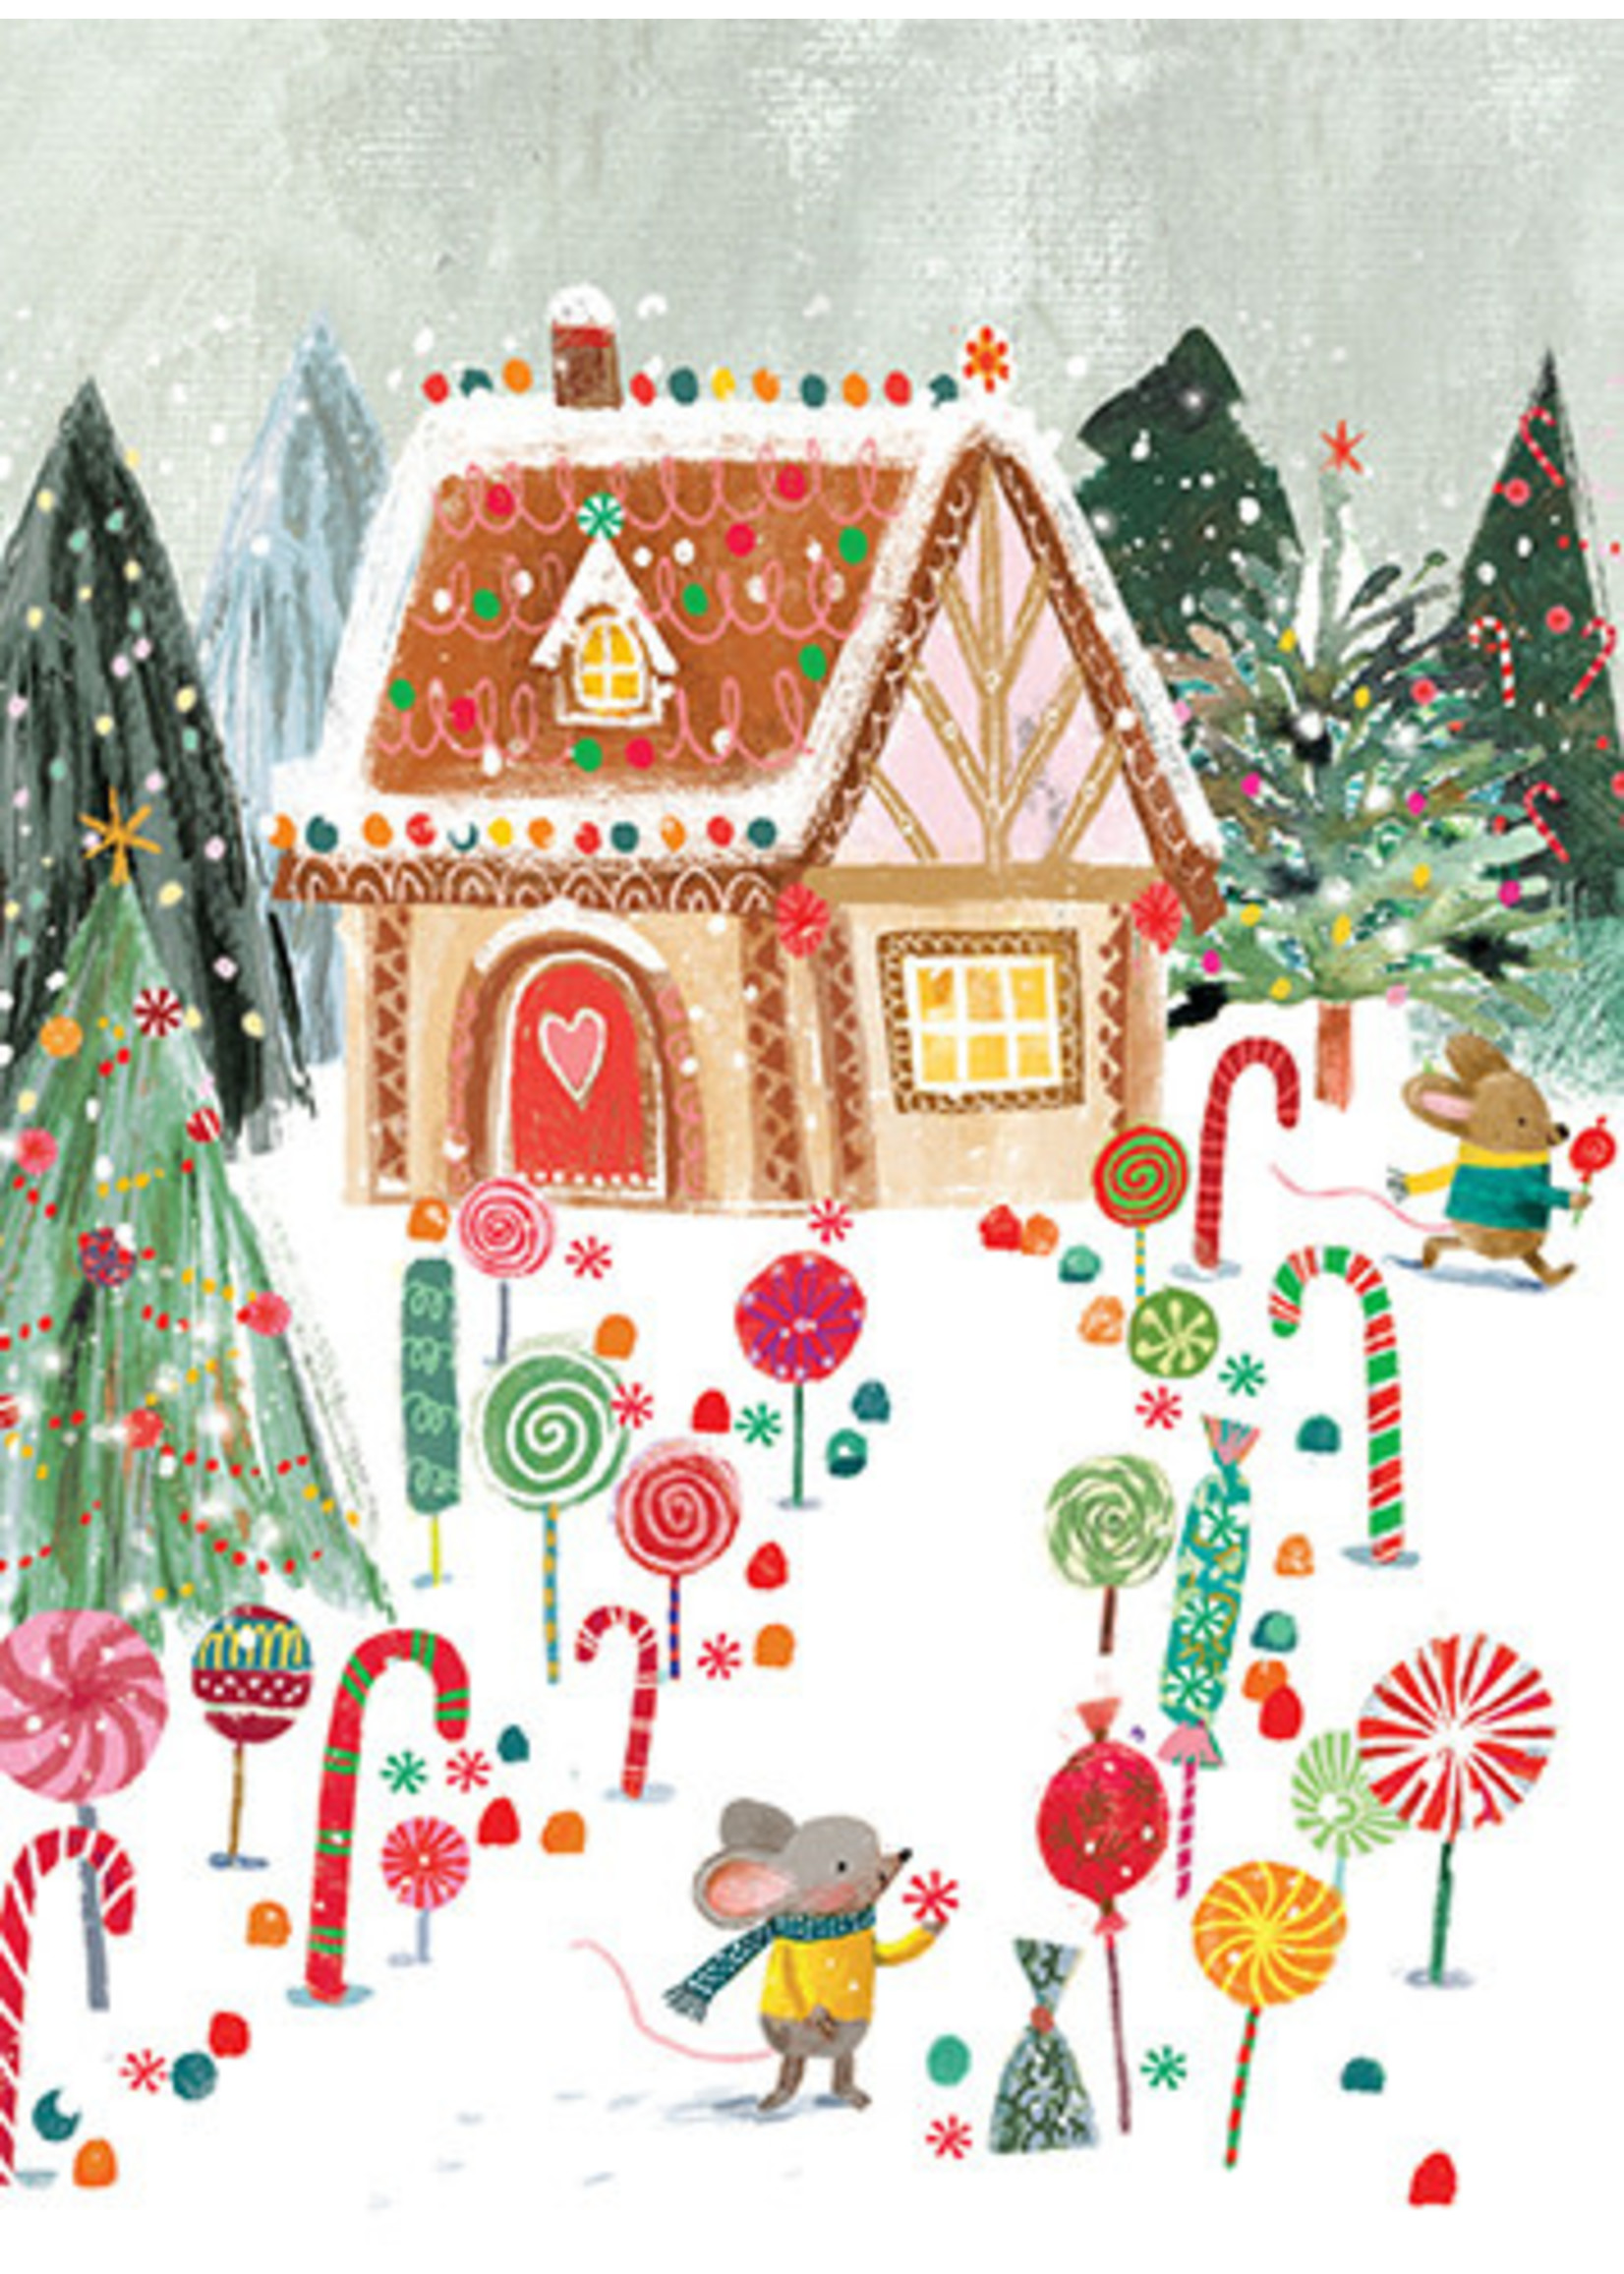 Calypso Cards Gingerbread House Greeting Card